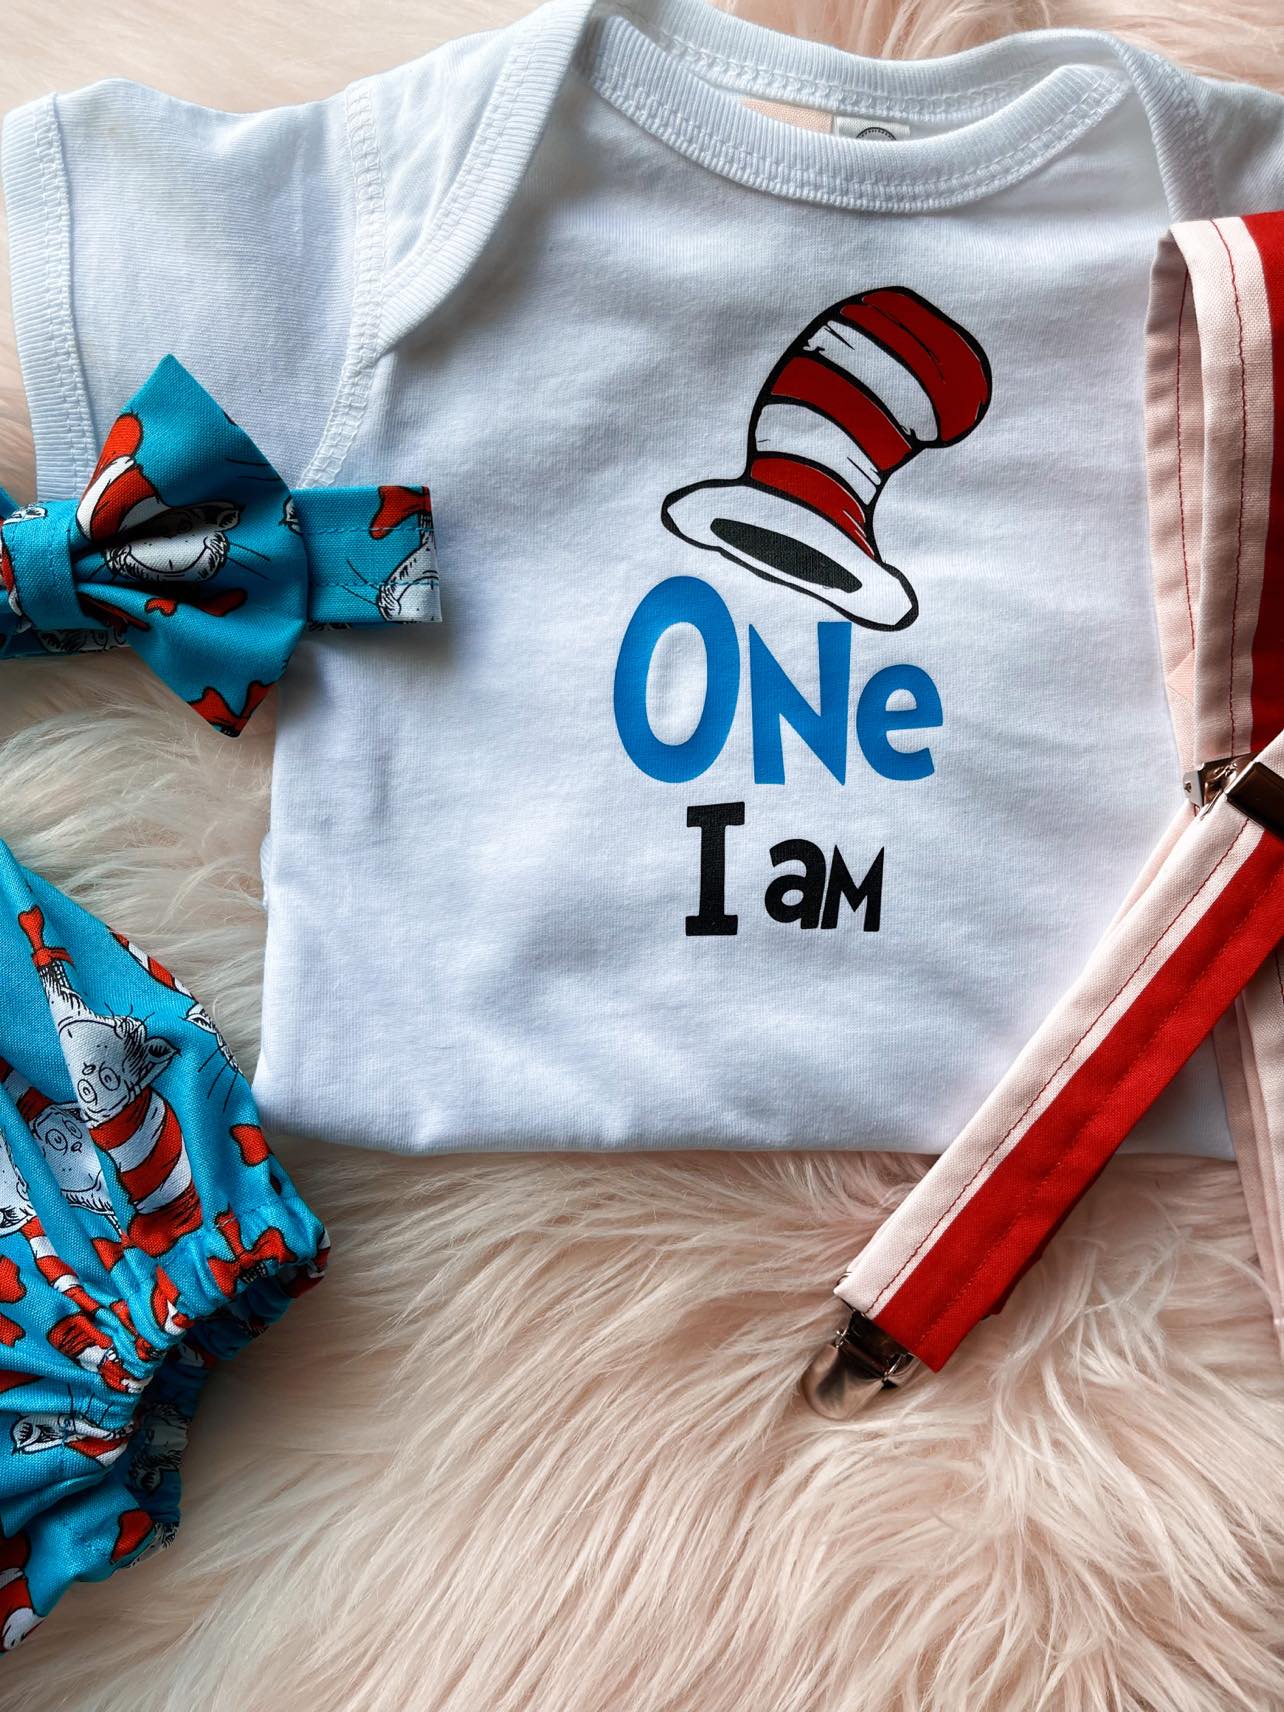 Dr. Seuss "Cat in the Hat" Birthday Outfit